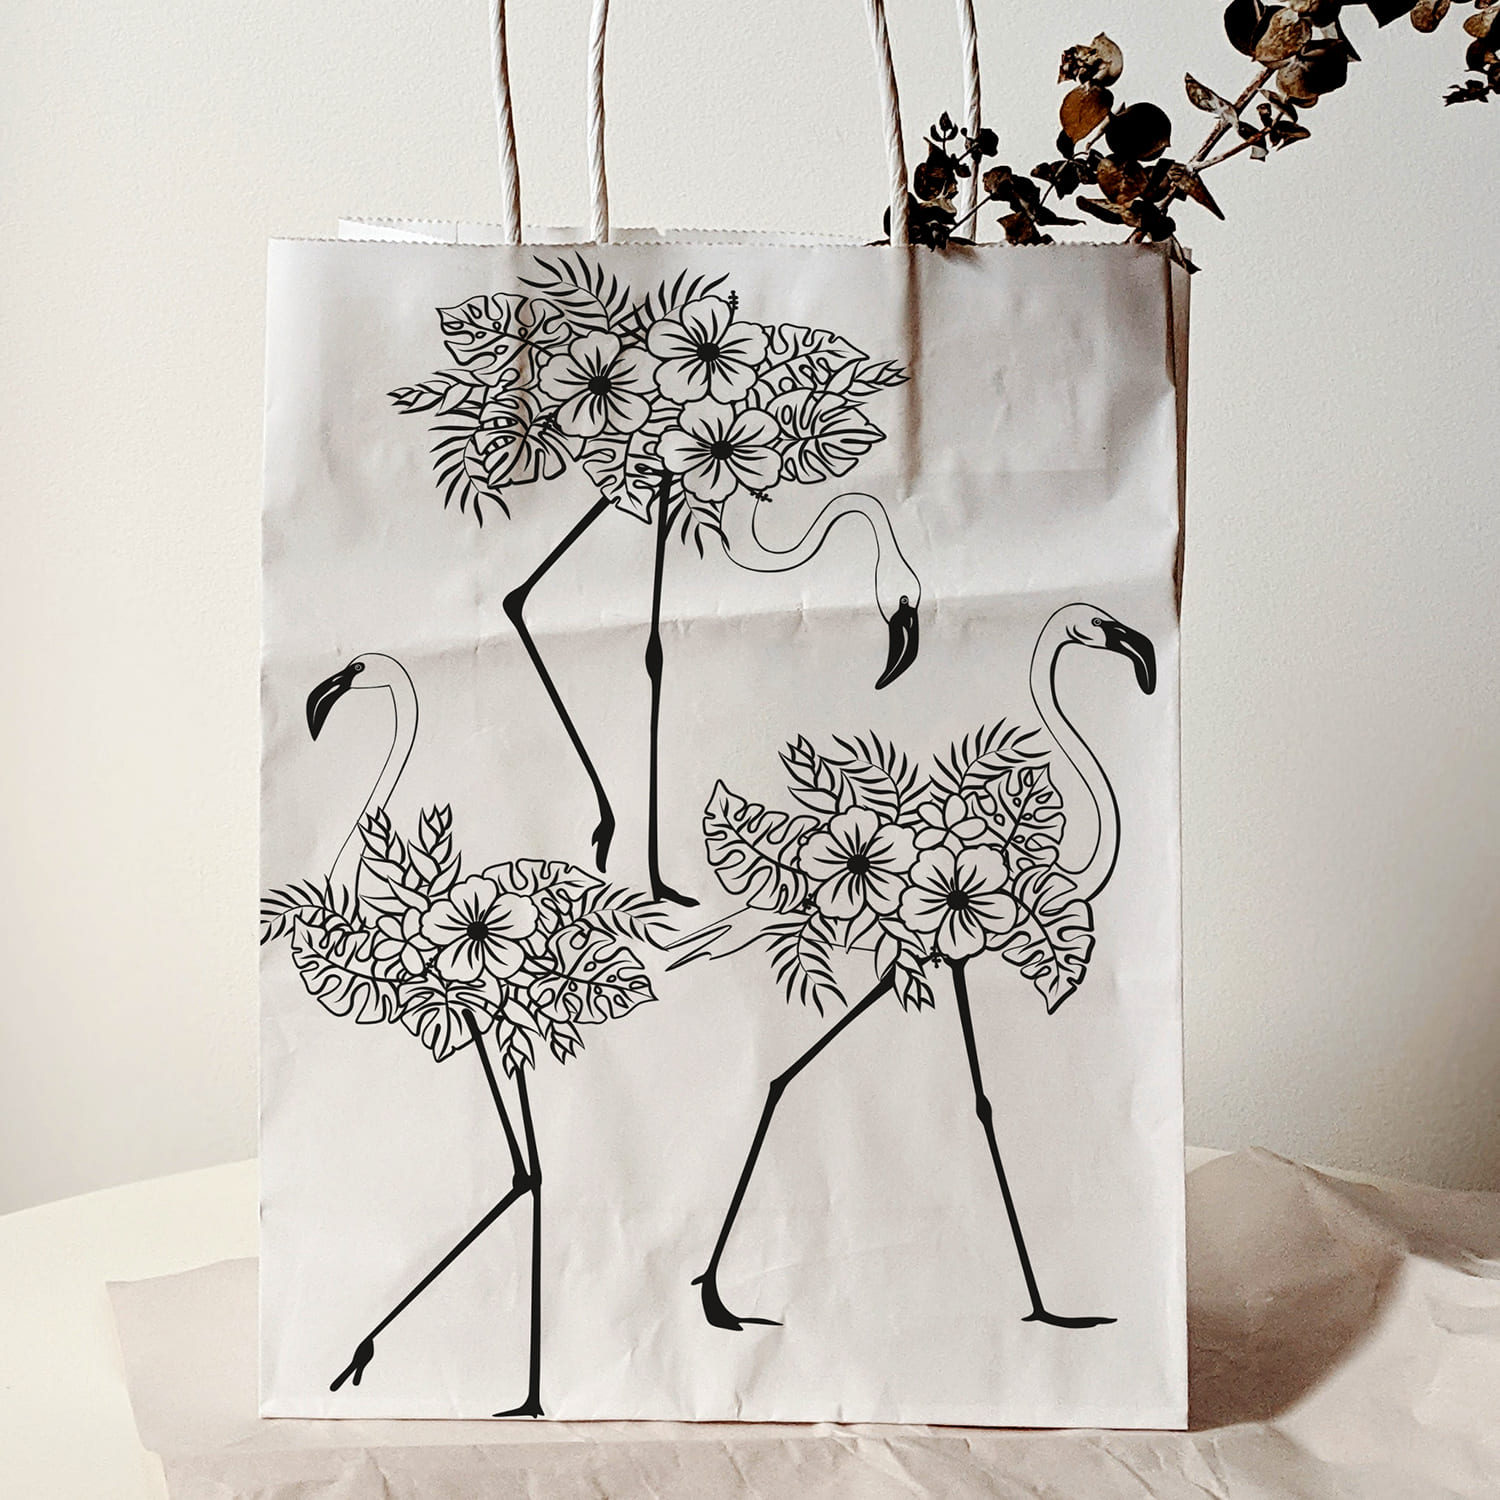 Two shopping bags decorated with flowers and flamingos.